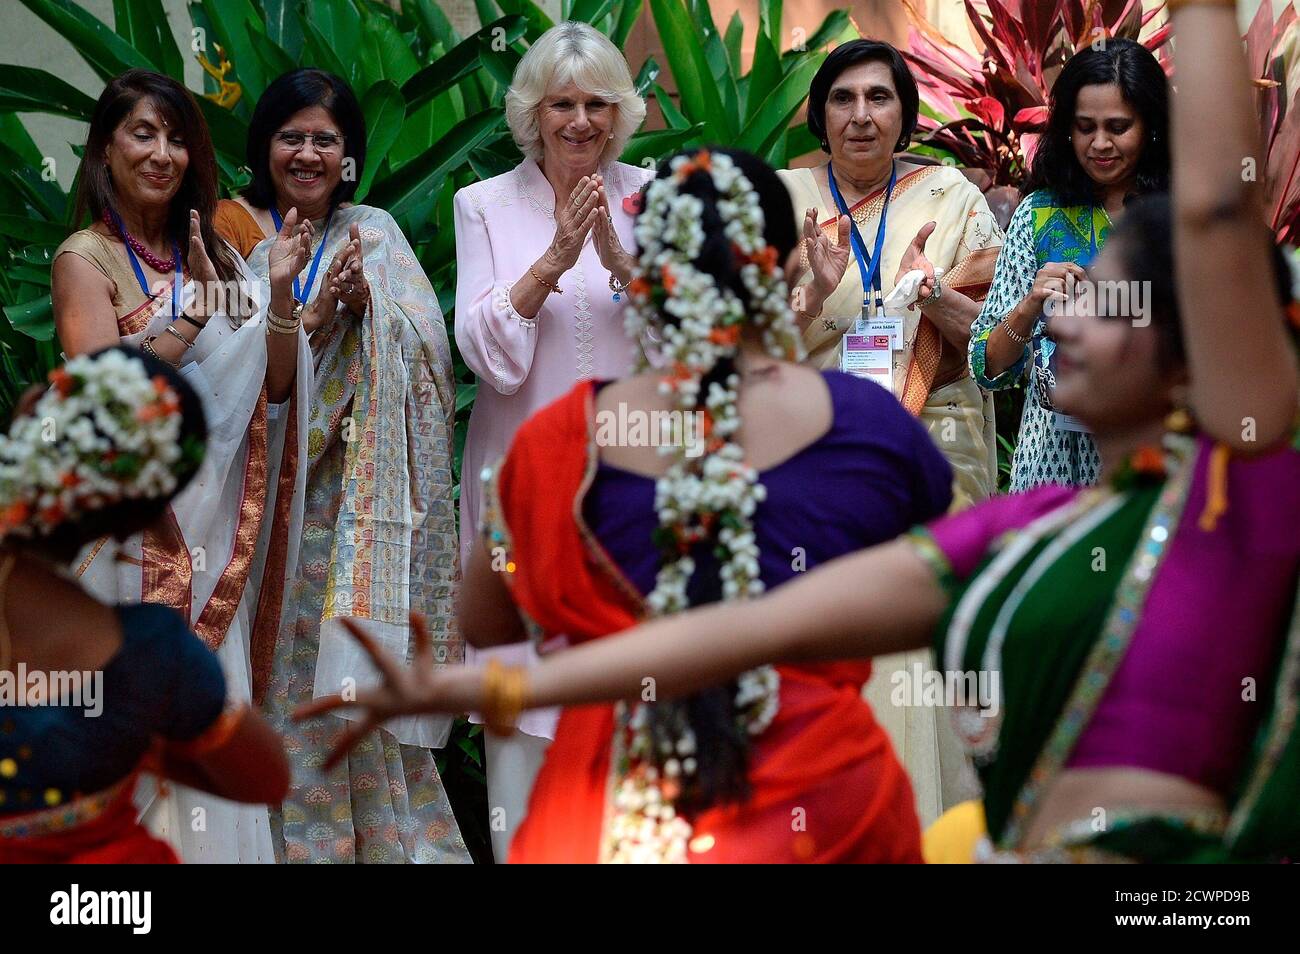 Britain's Camilla (C), Duchess of Cornwall, applauds a performance by  students during a visit to the Asha Sadan children's home in Mumbai  November 9, 2013. Prince Charles and his wife Camilla are